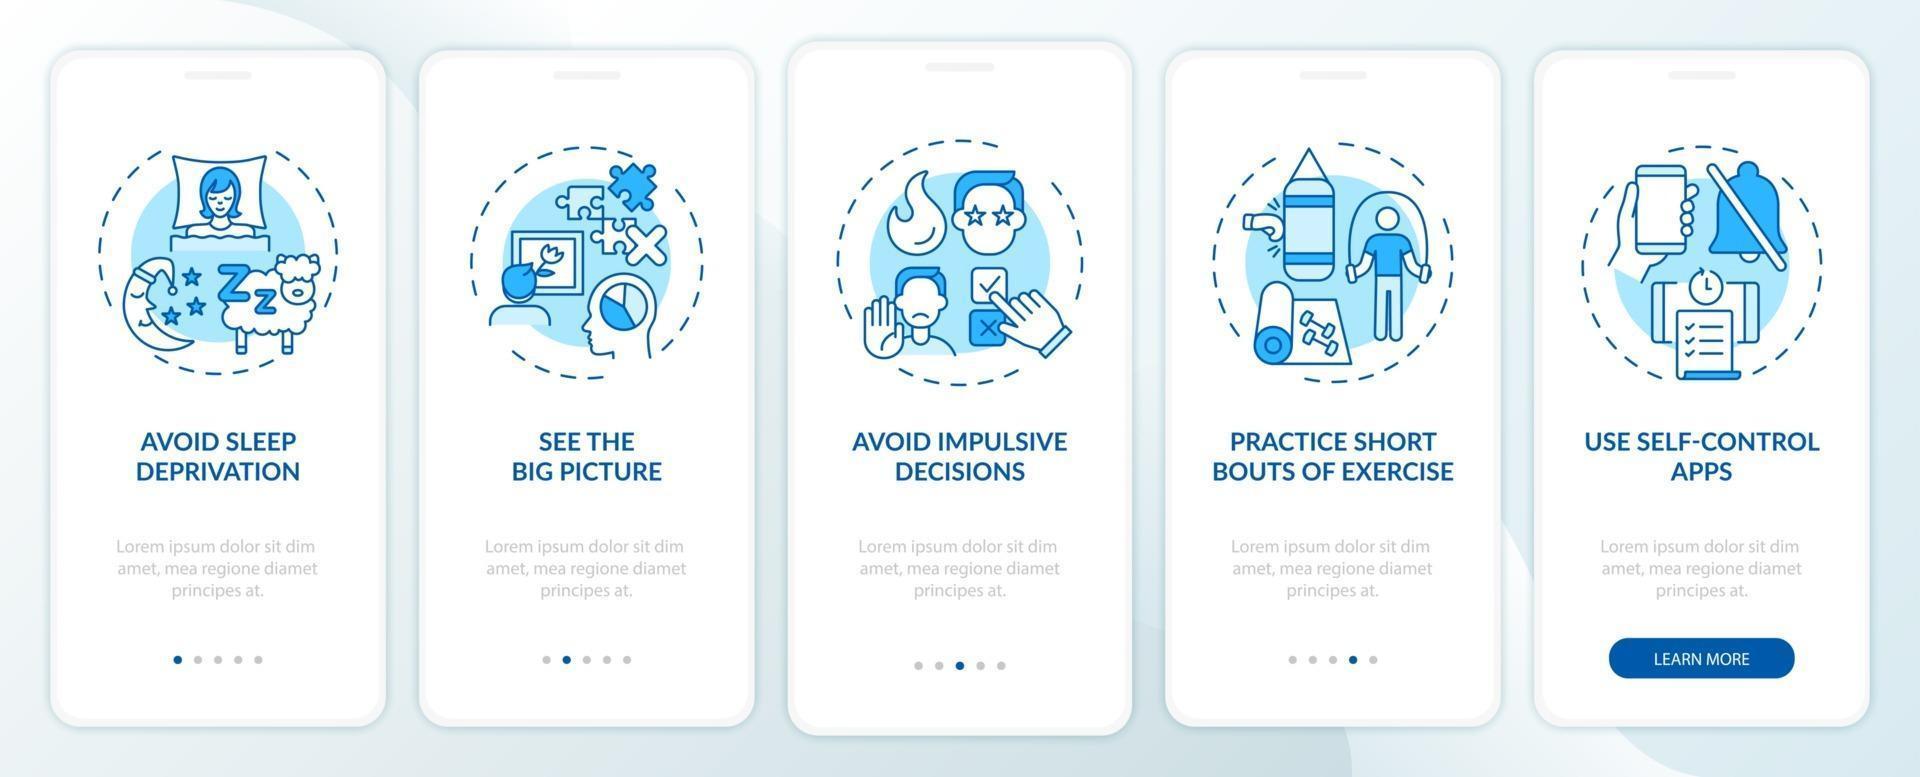 Self control boosting tips blue onboarding mobile app page screen with concepts vector